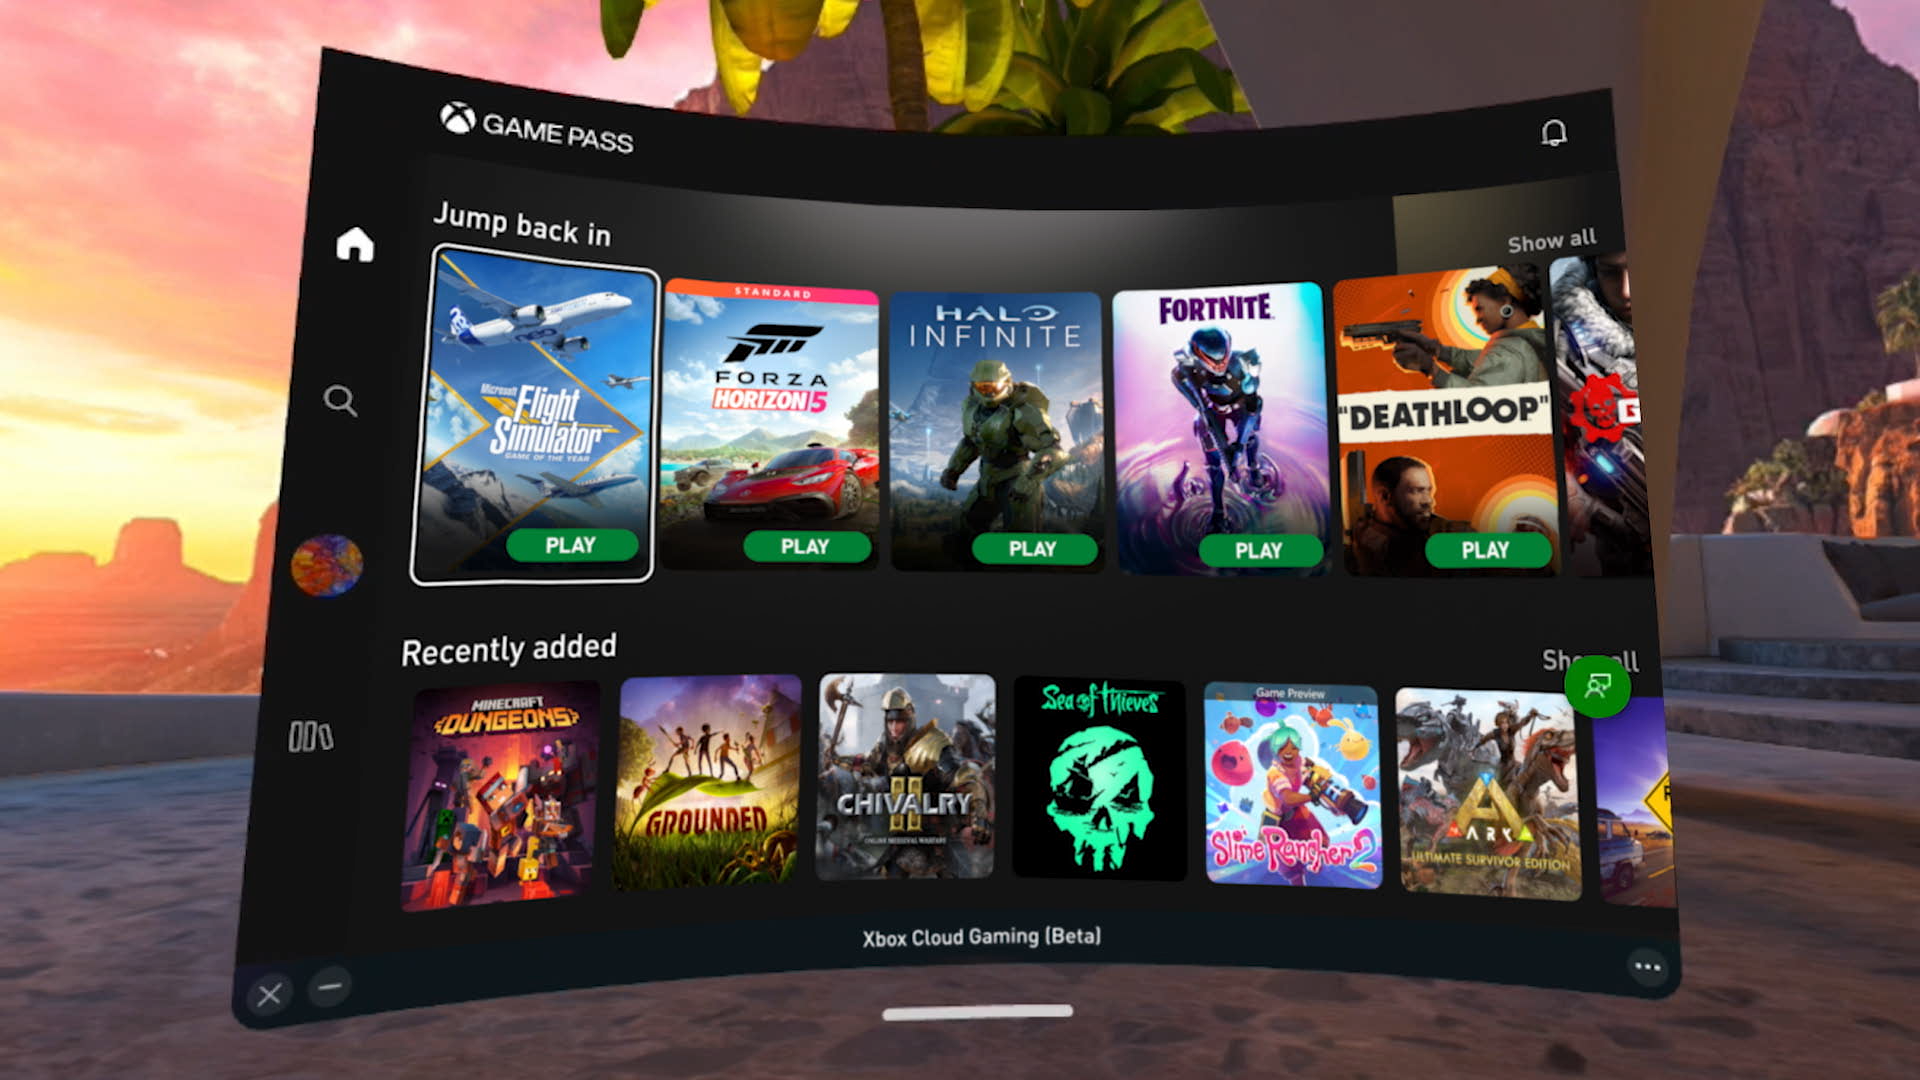 Xbox Game Pass Is Coming To Meta Quest VR Headset   GameSpot